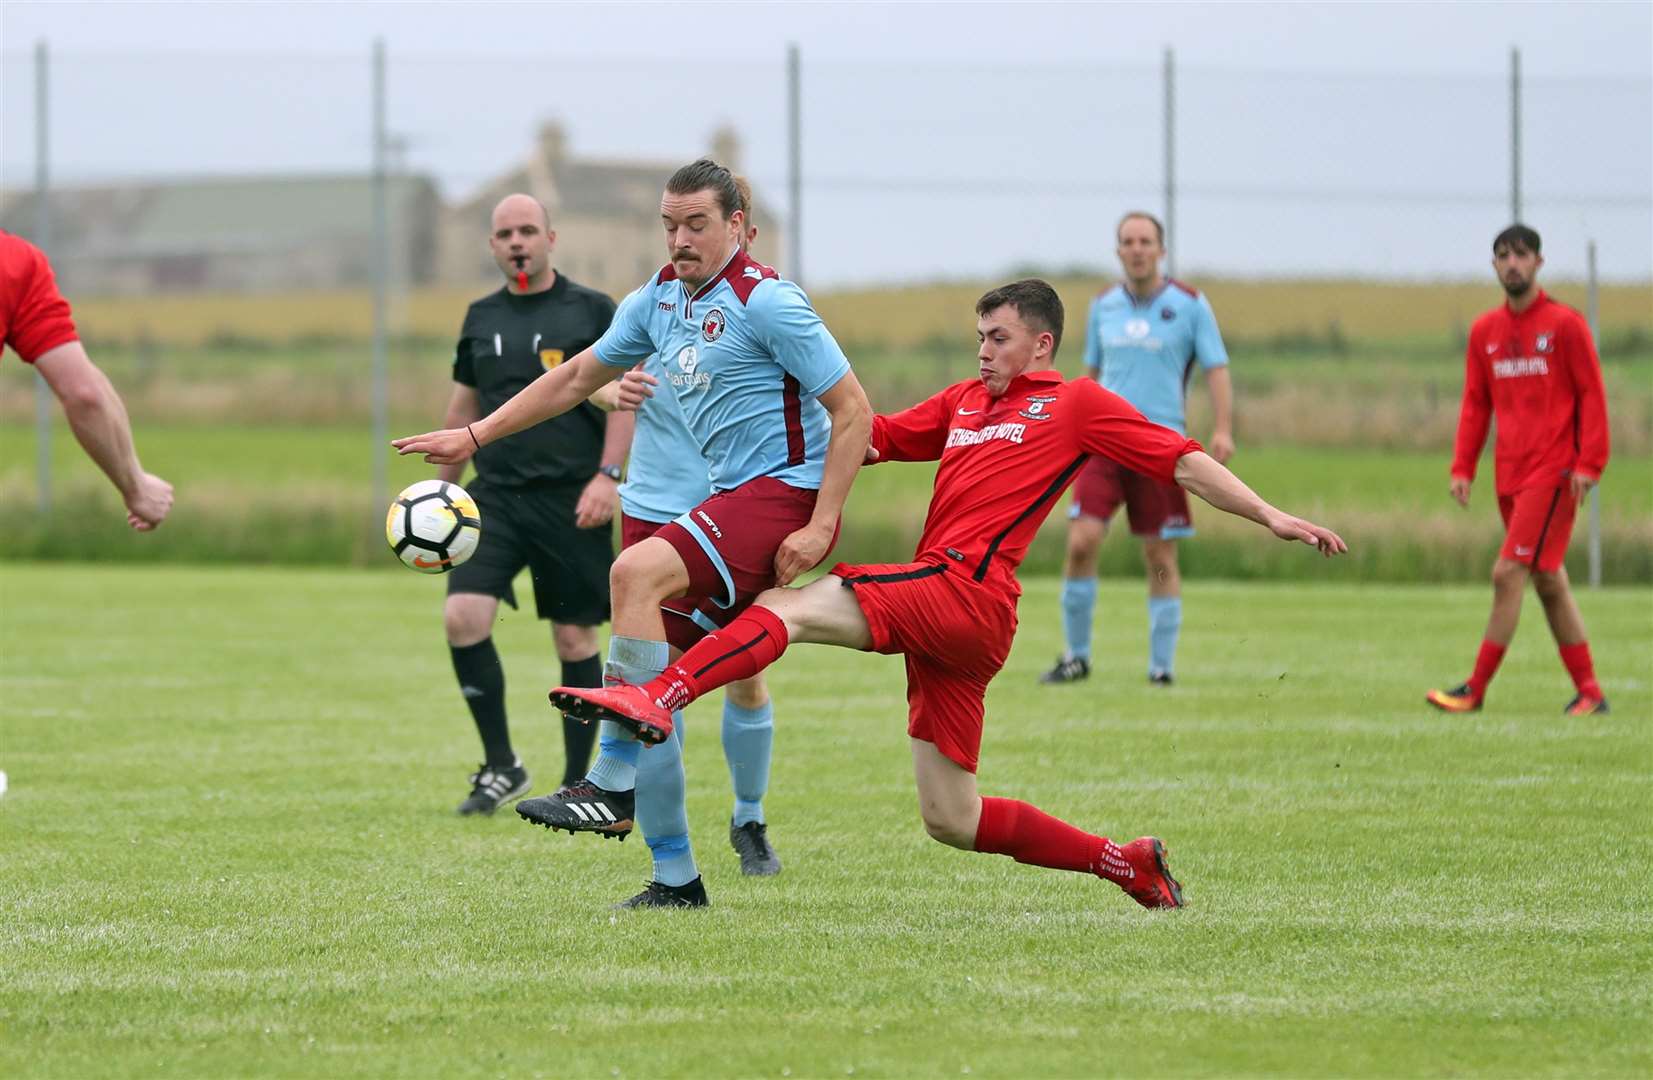 Ryan Campbell of Wick Groats tackles Pentland United's James McLean during last week's county league top-of-the-table fixture at Ham Park which Groats won 3-1. The teams meet again on Saturday in the last four of the Highland Amateur Cup. Picture: James Gunn